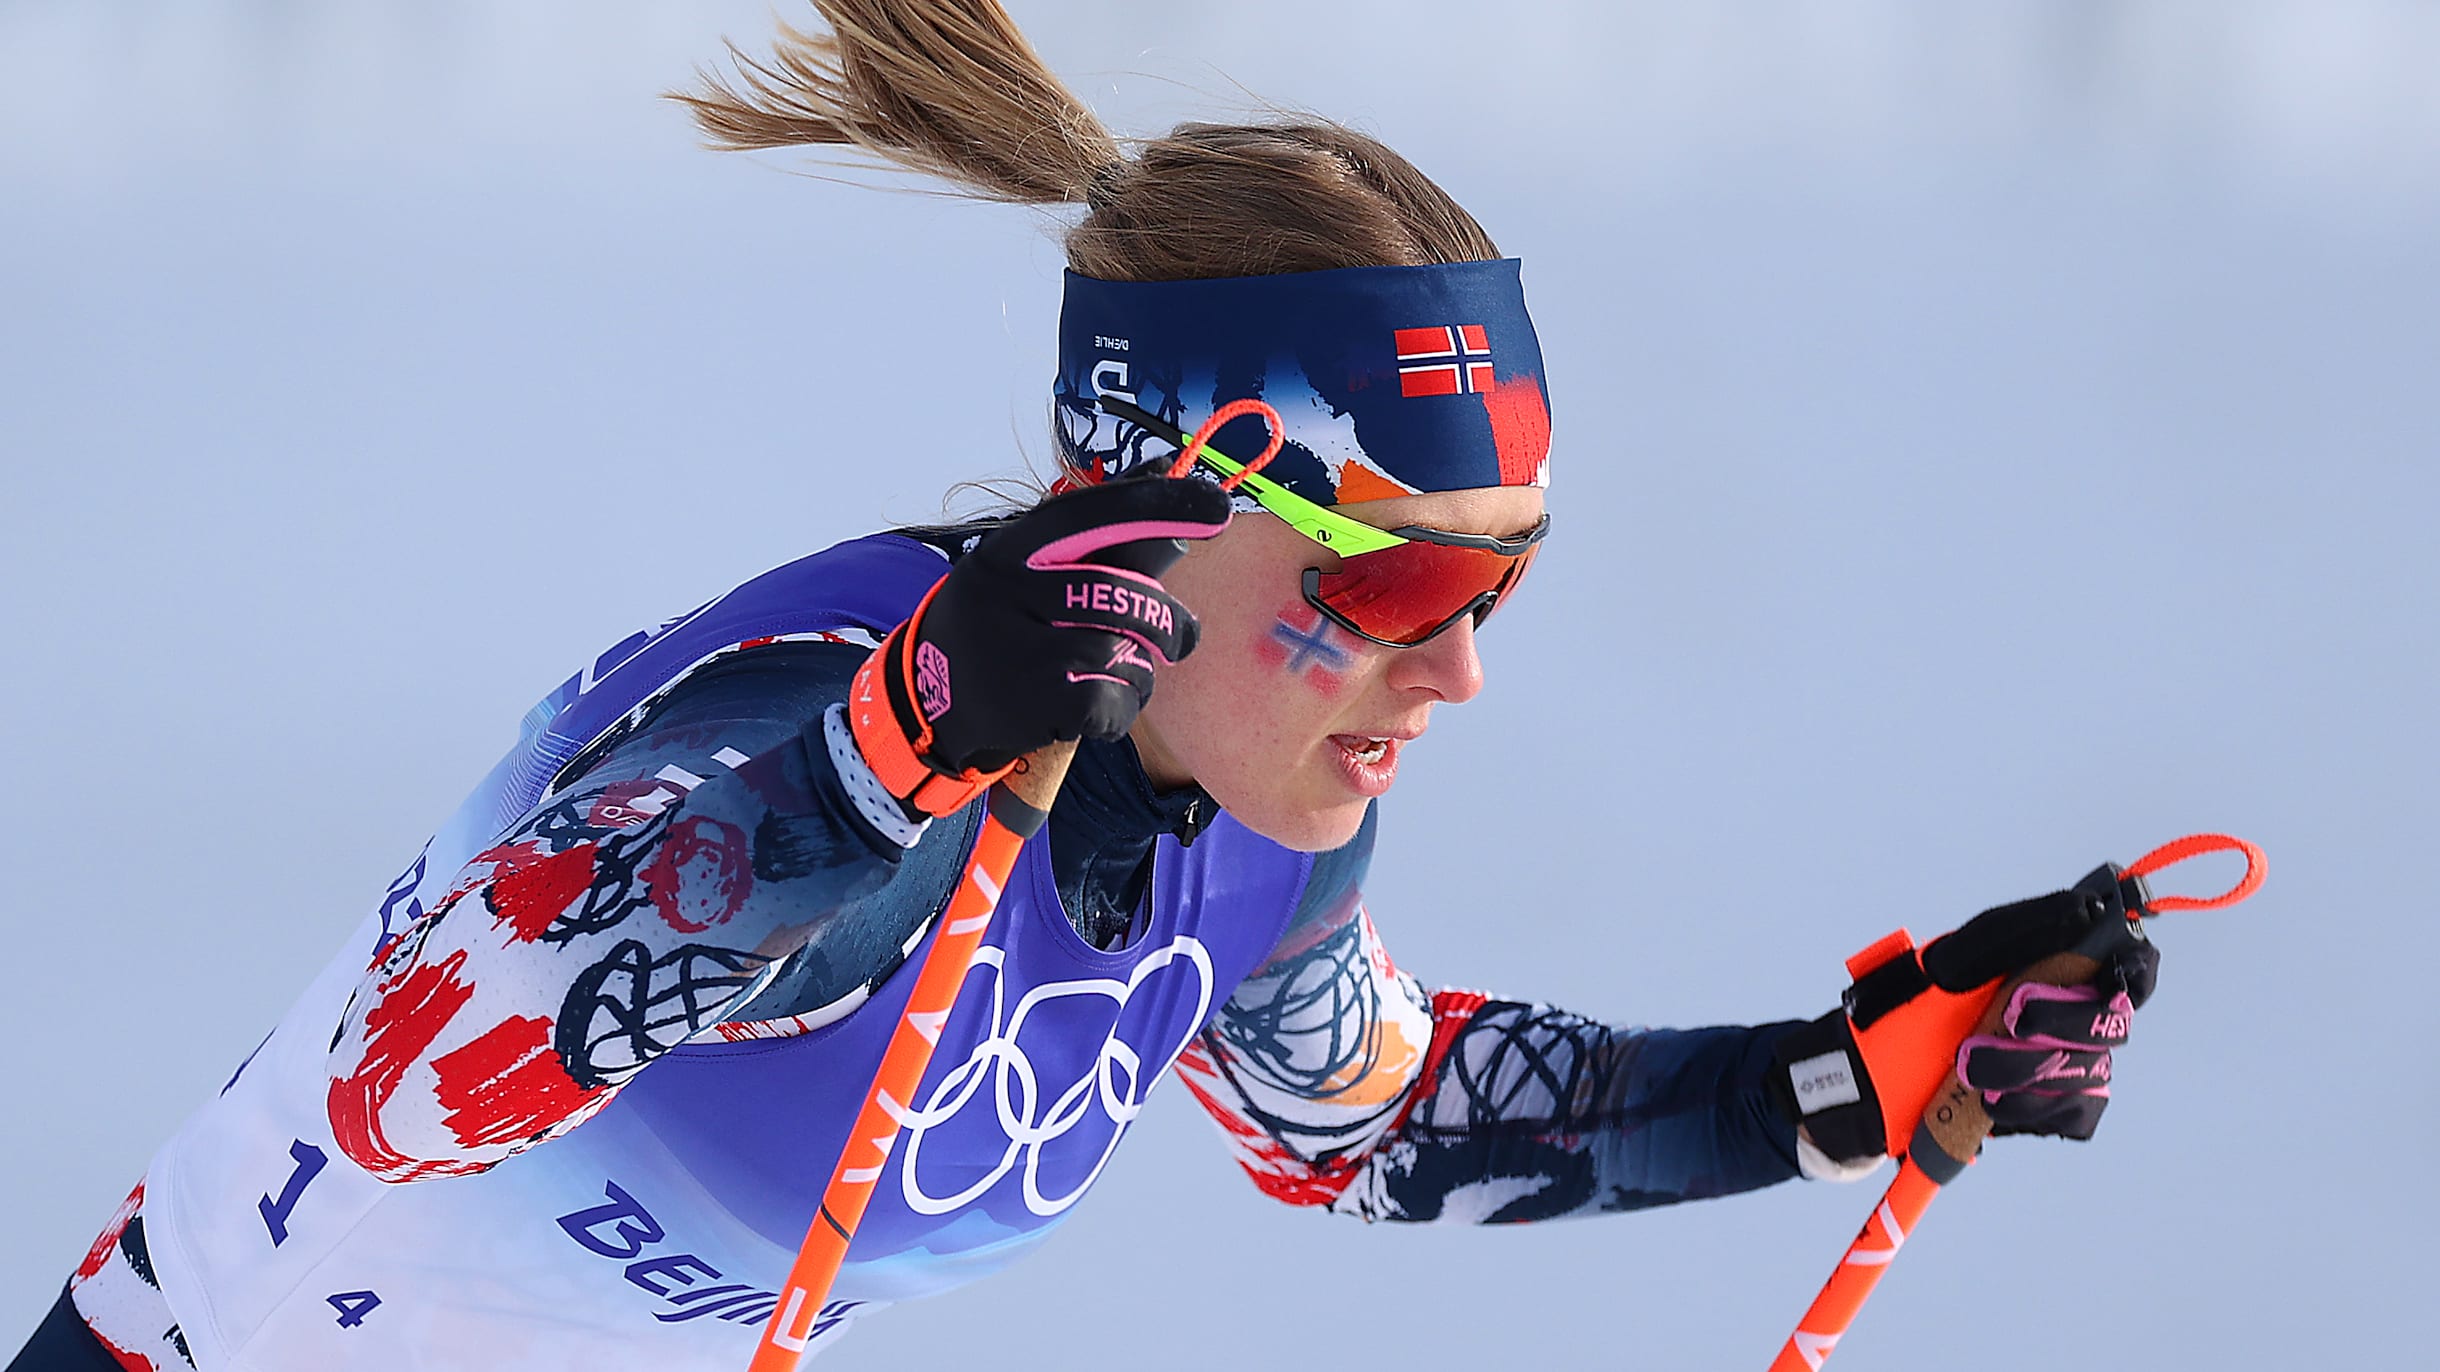 Cross country skiing - Ragnhild Haga wins first womens 50km World Cup race with Jessie Diggins third